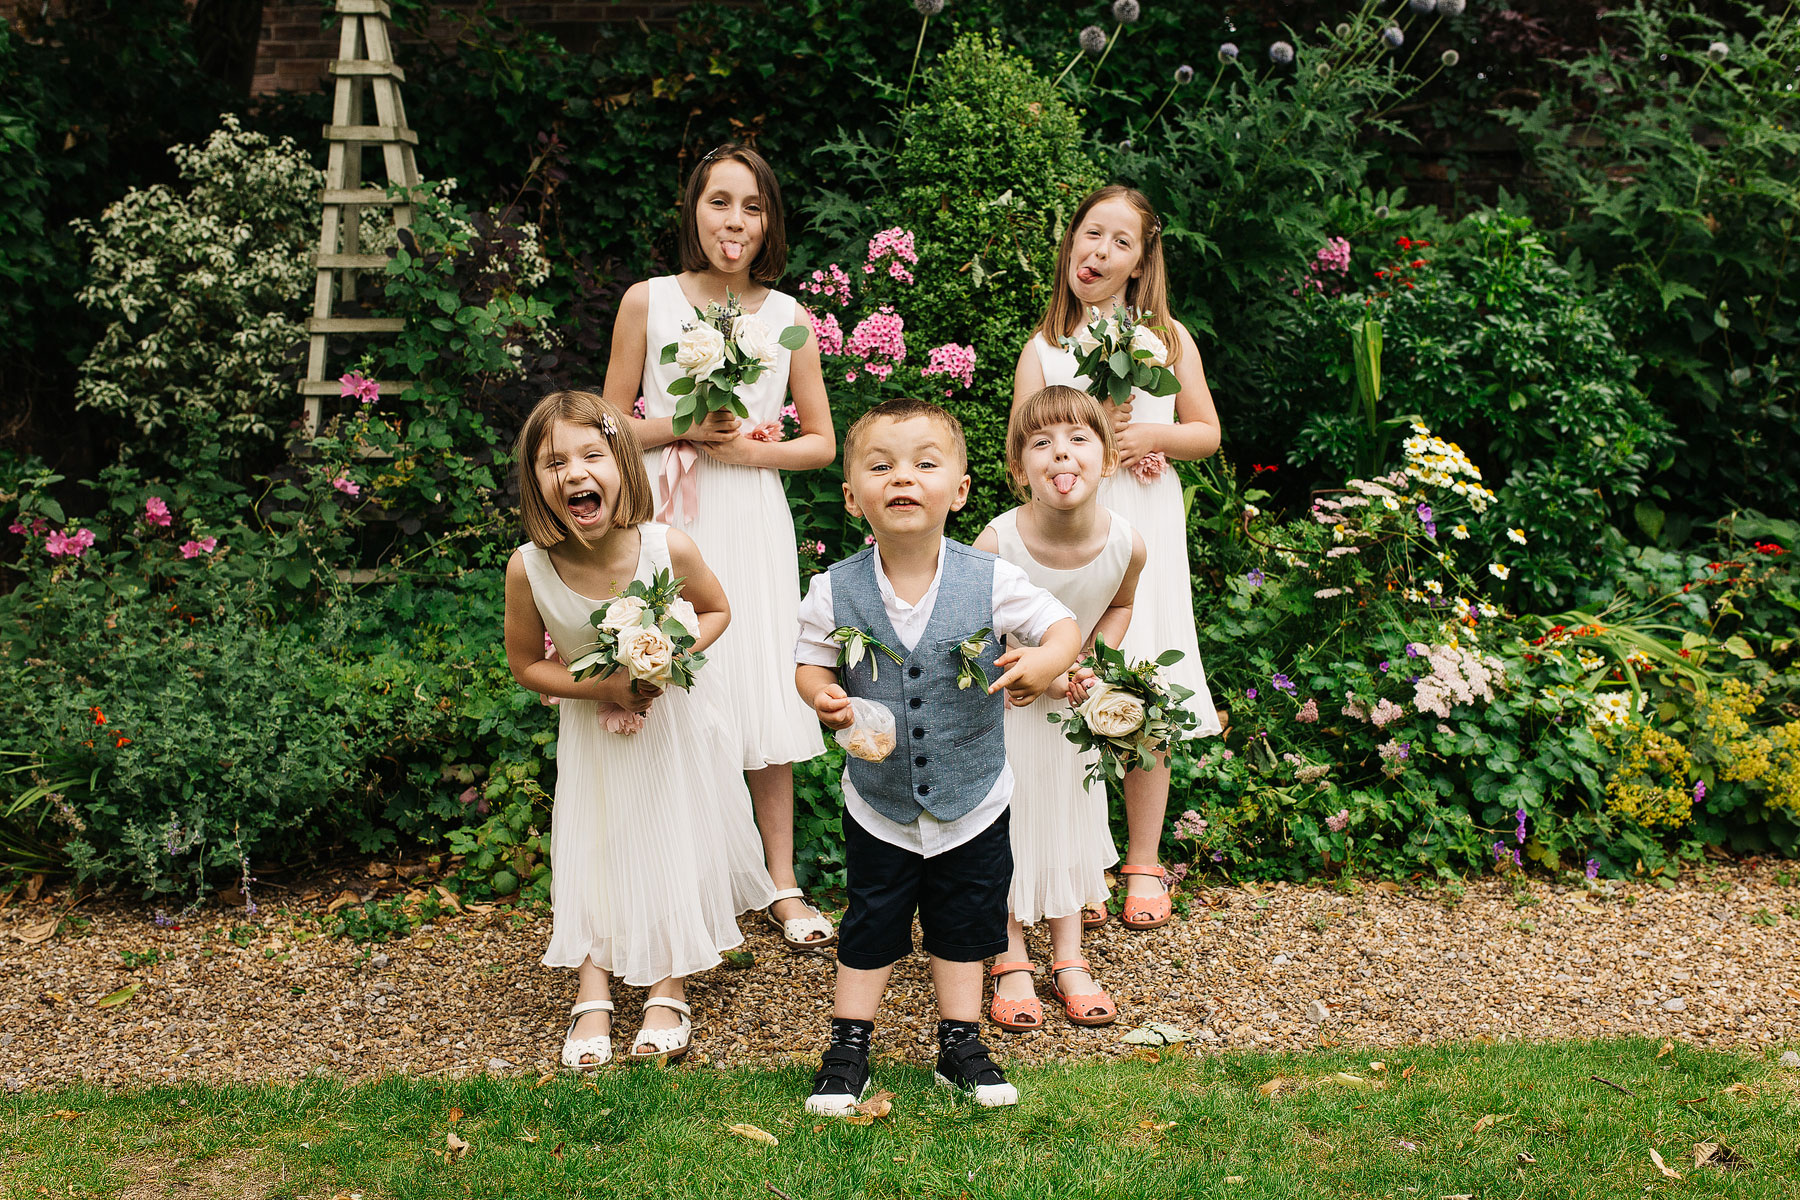 fun pictures of kids at weddings